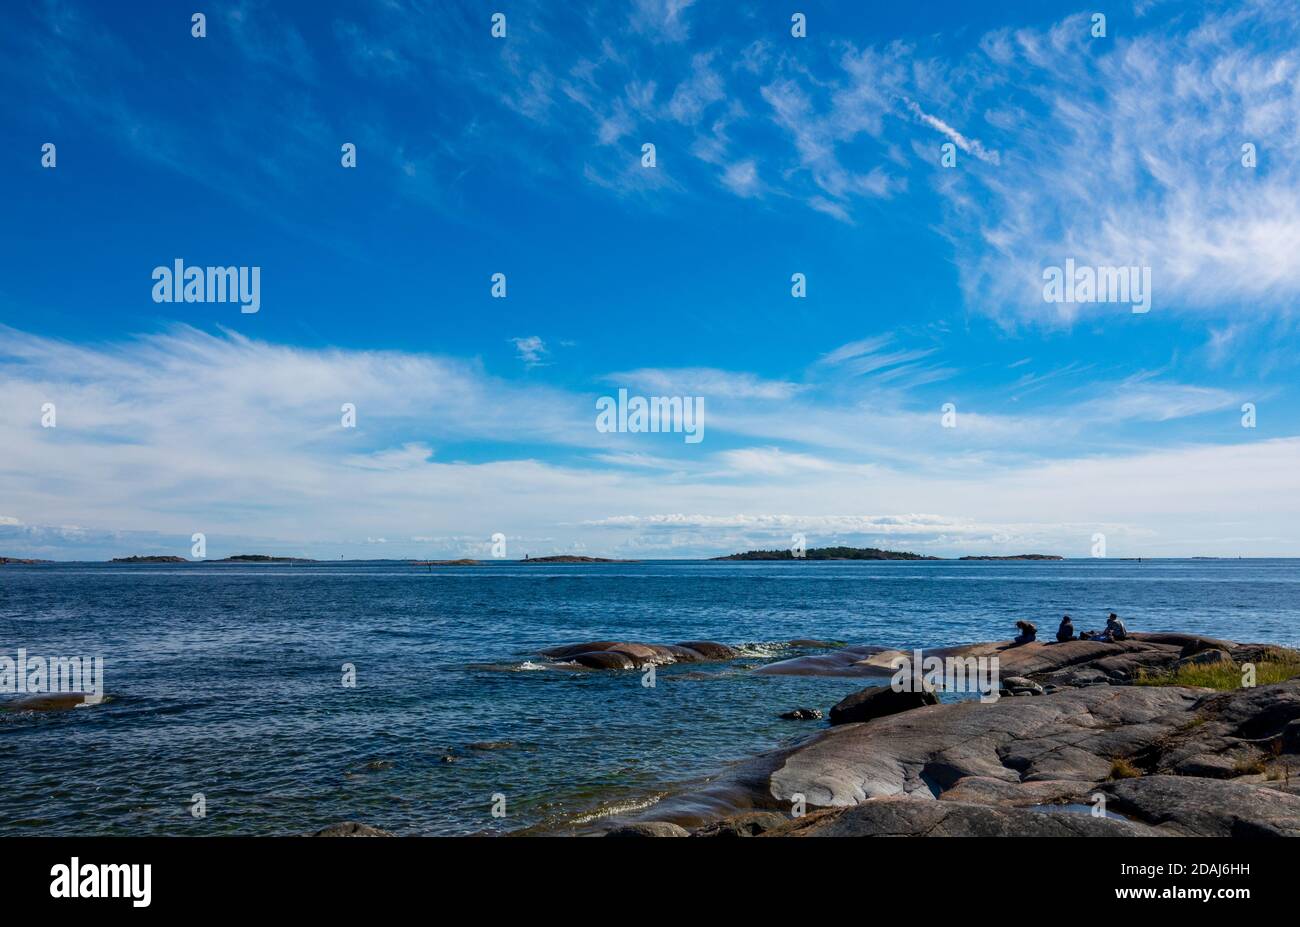 Sunny beach at Hanko city in southmost part of Finland Stock Photo